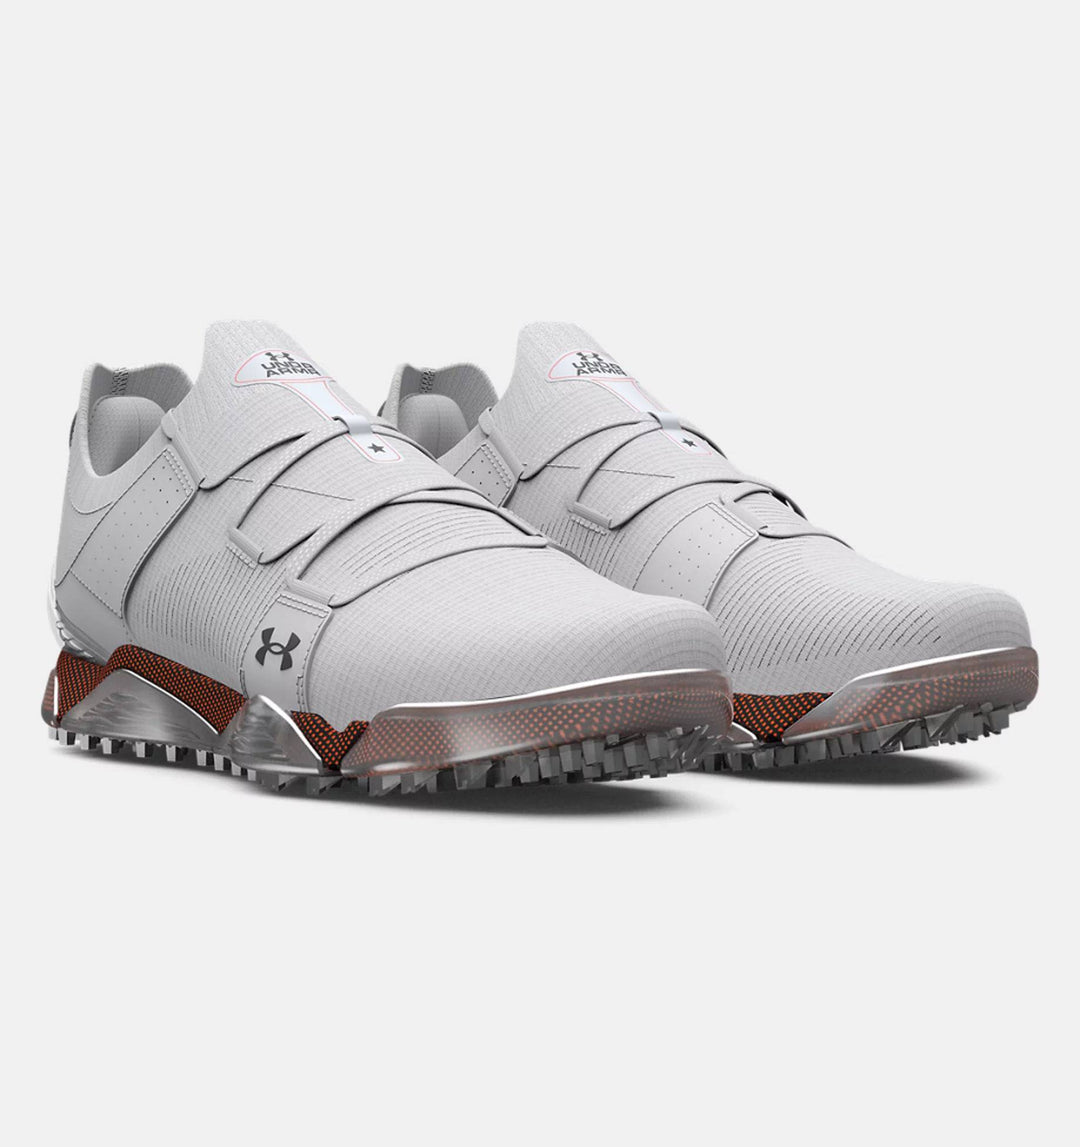 Under Armour Mens HOVR Tour Spikeless Golf Shoe - HALO GRAY/AFTER BURN